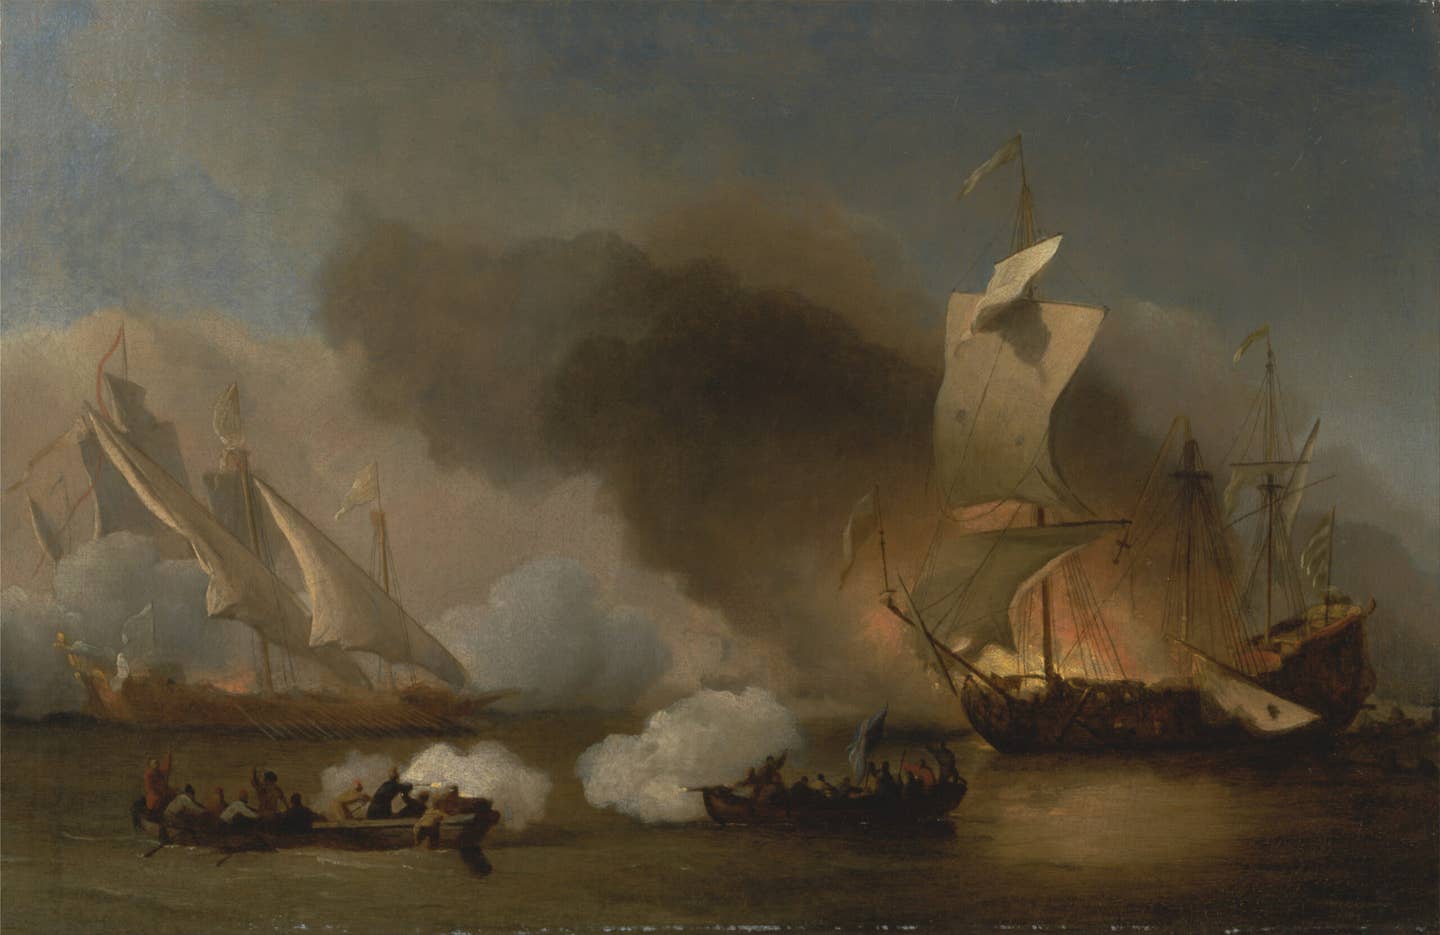 <em>An Action off the Barbary Coast with Galleys and English Ships</em>, another painting by William van de Velde the Younger. <em>Public Domain</em>